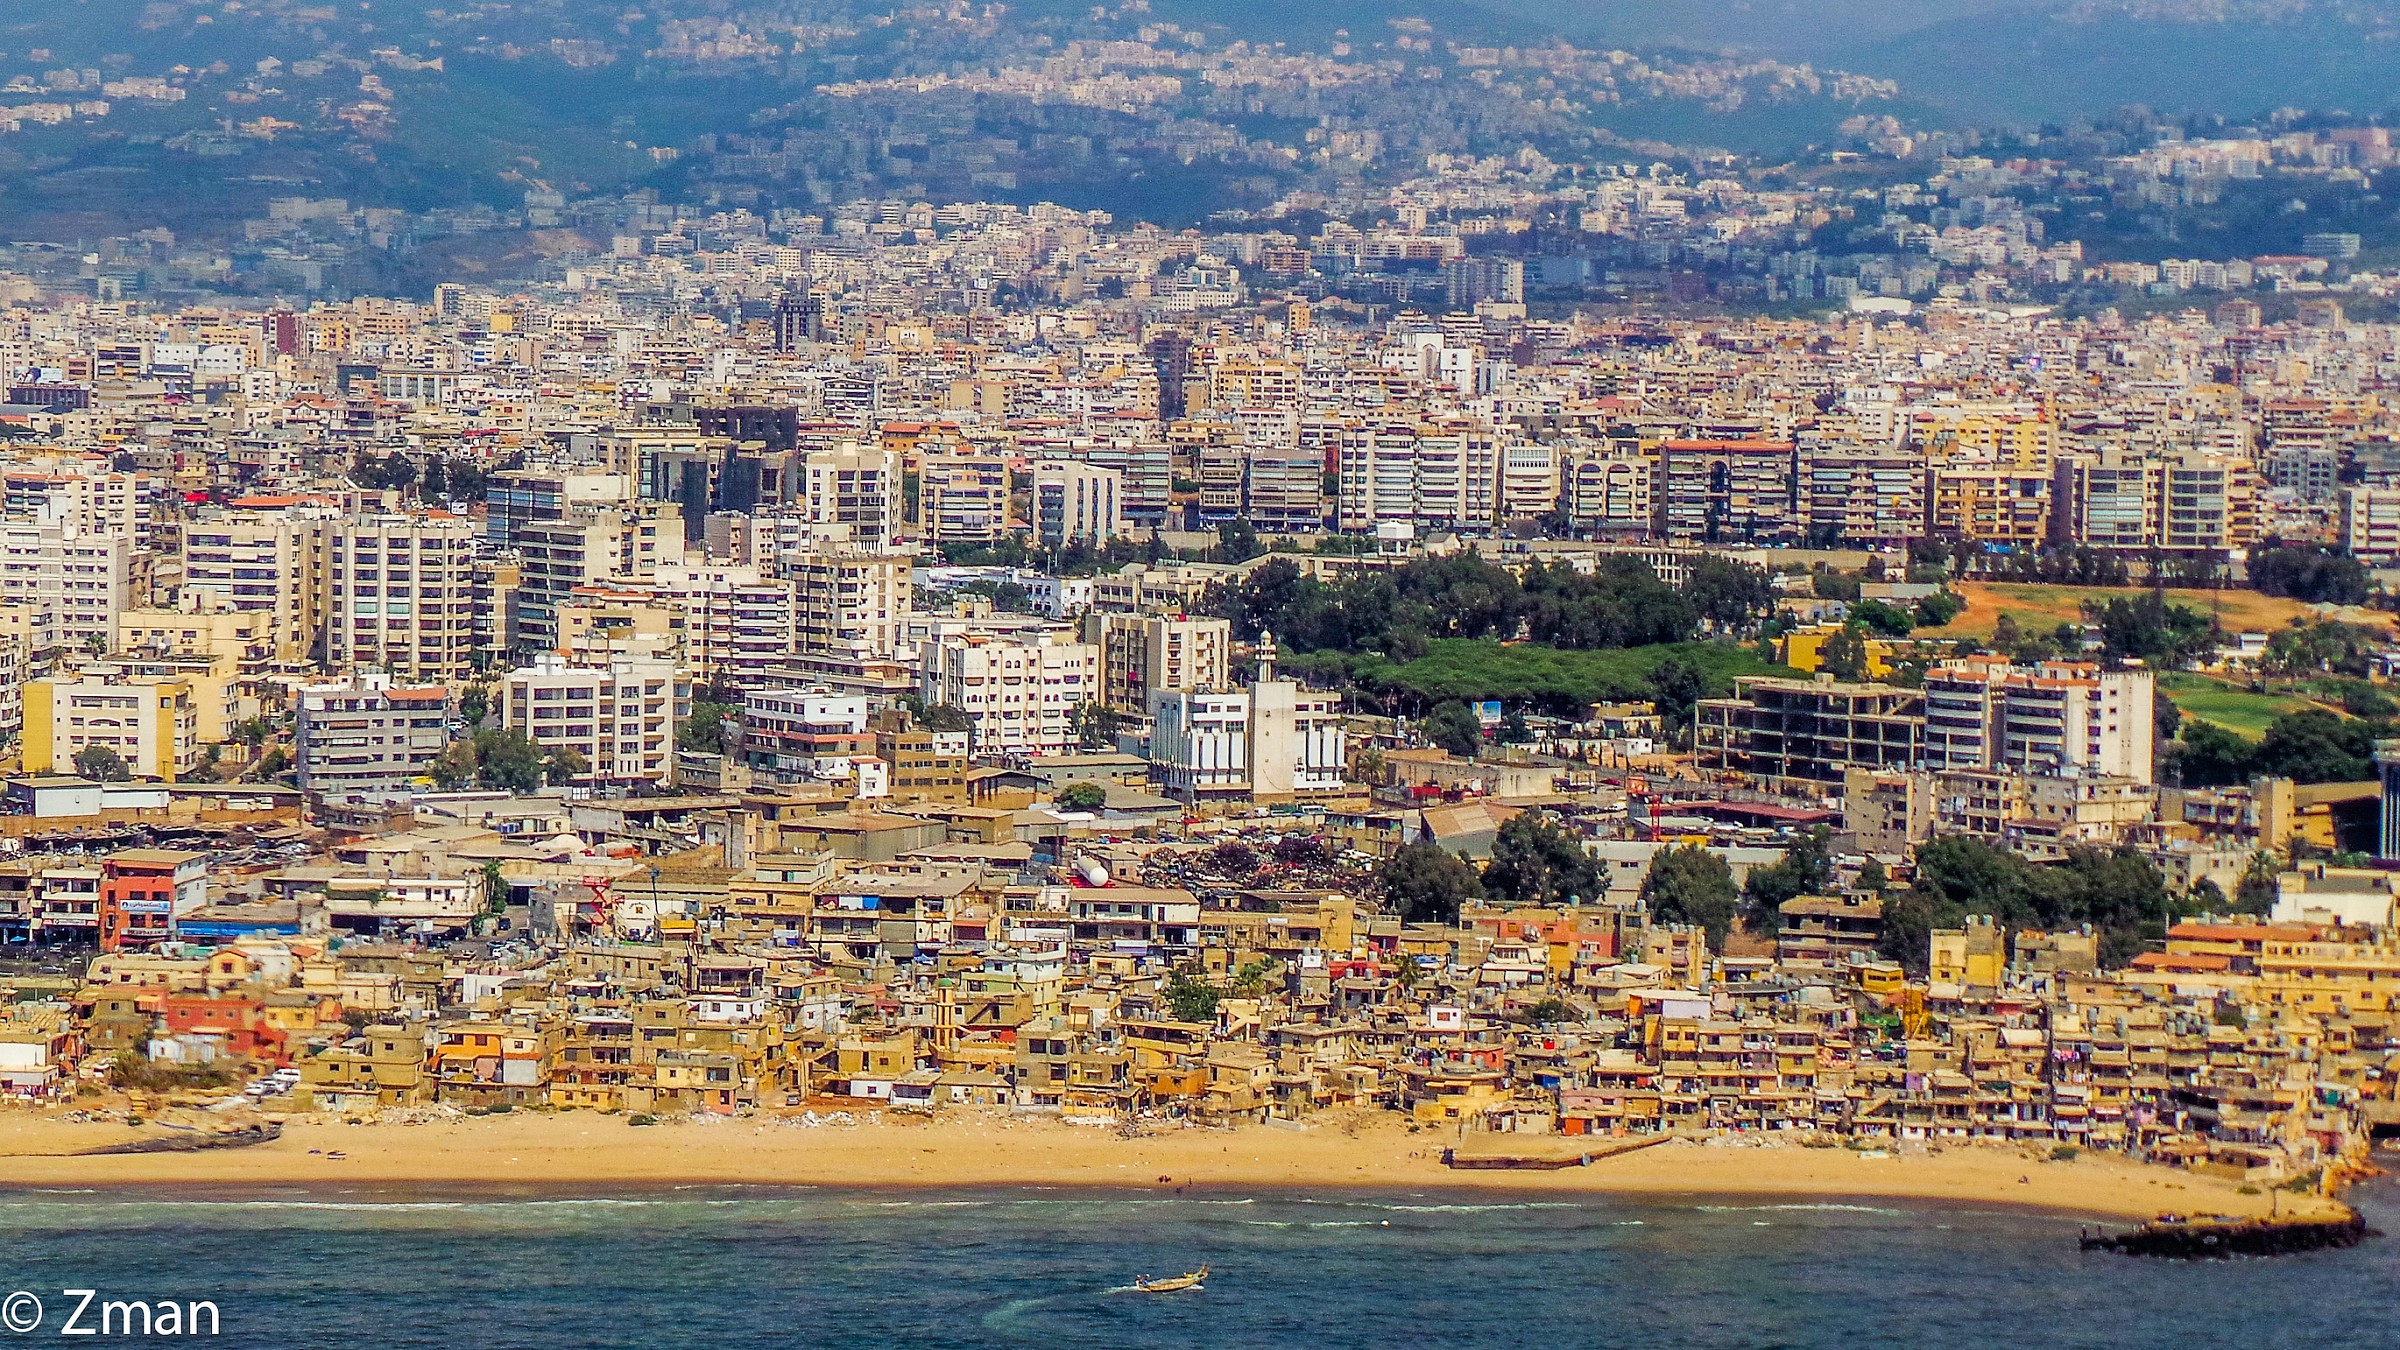 Beirut My City From The Air...